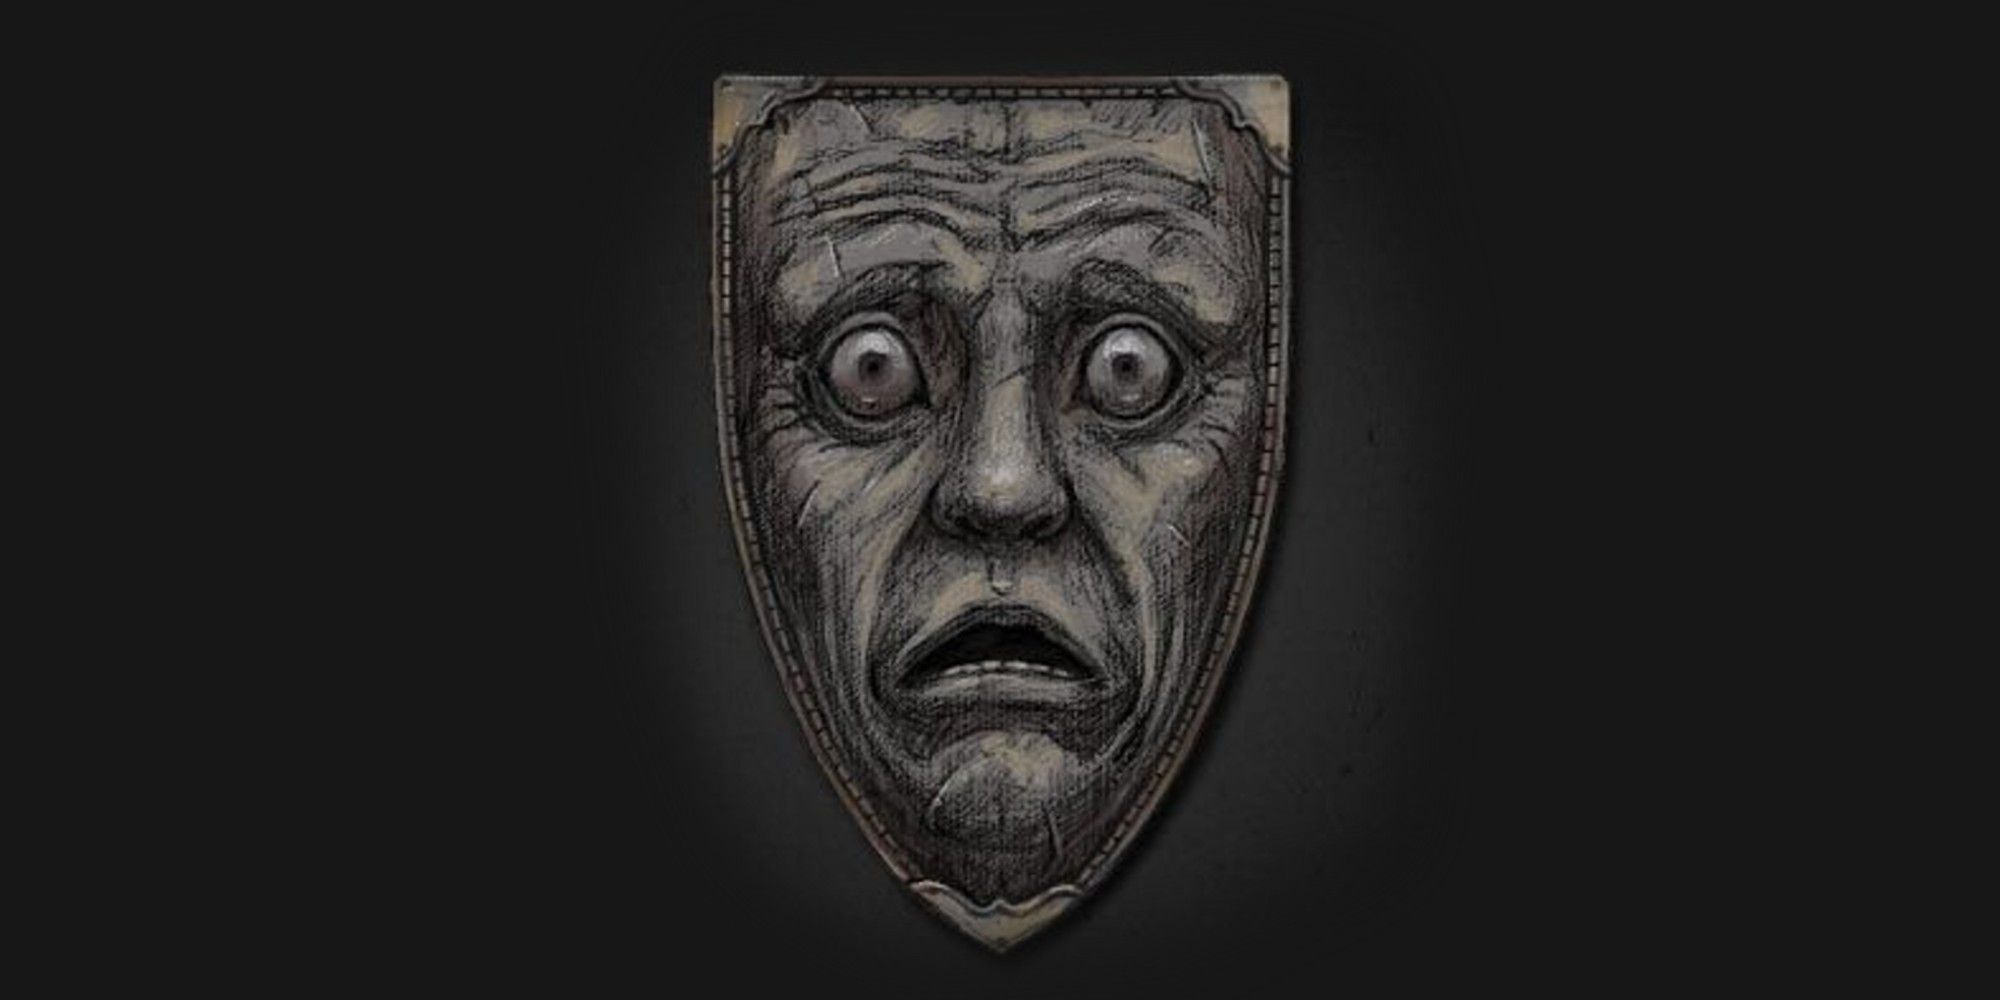 DnD shield of expression